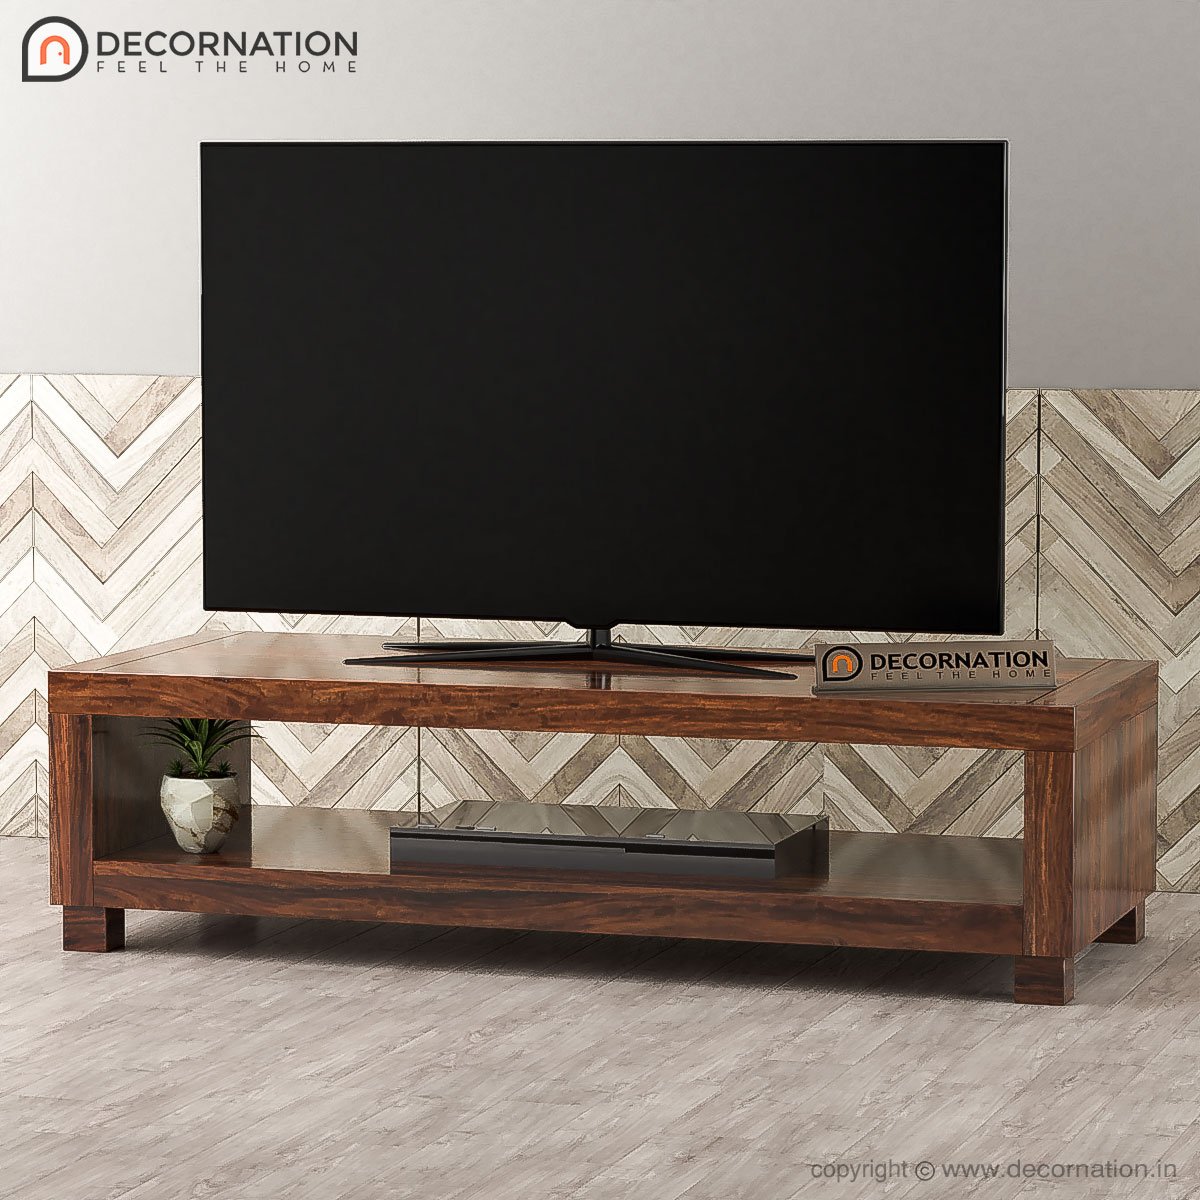 Leander Wood TV Table with Shelf – Natural Finish